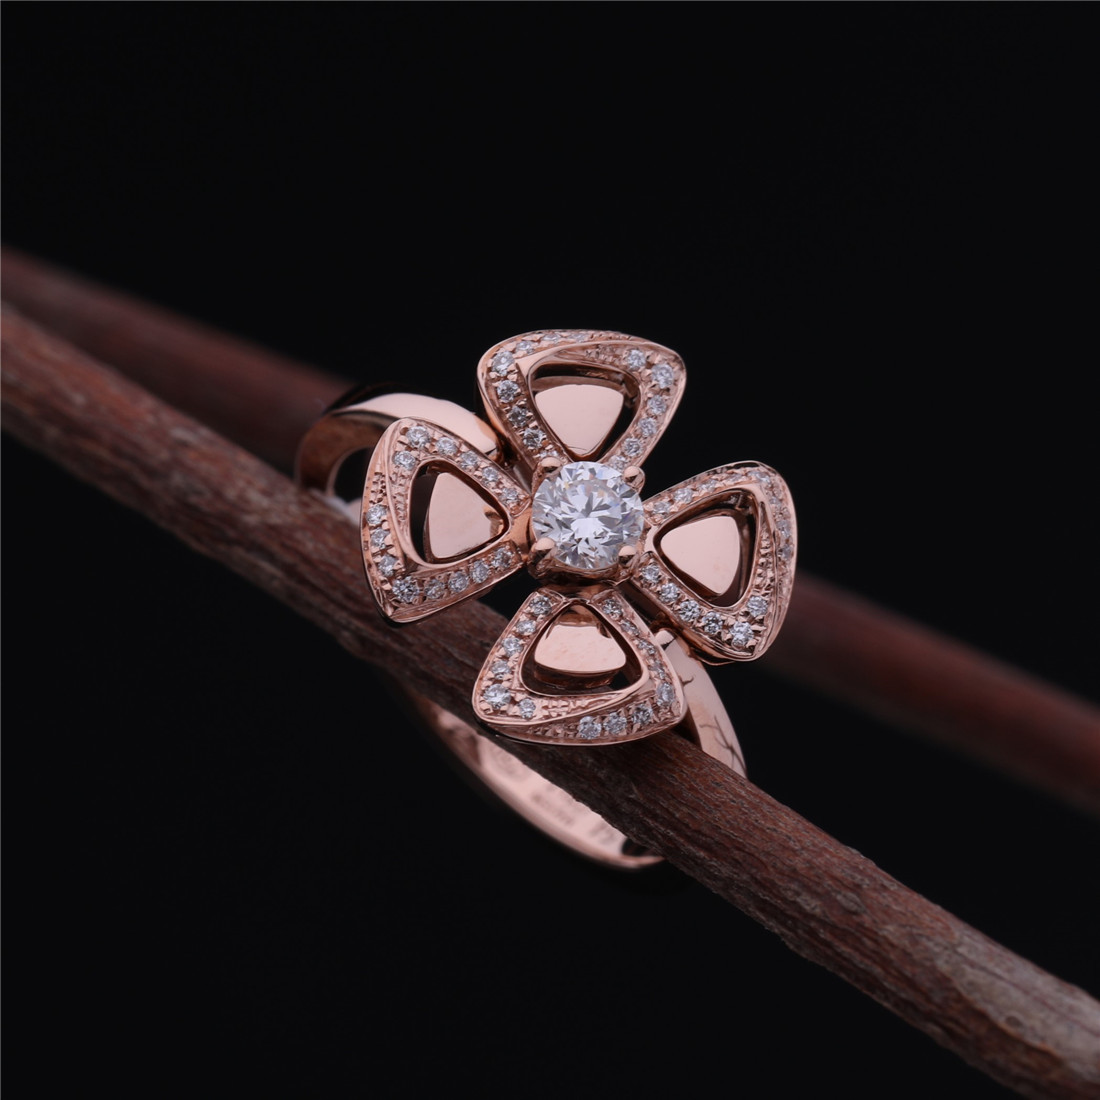 Quality Roman Love Flower Ring Fiorever 18 kt Rose Gold Ring set with a central diamond and pavé diamonds for sale